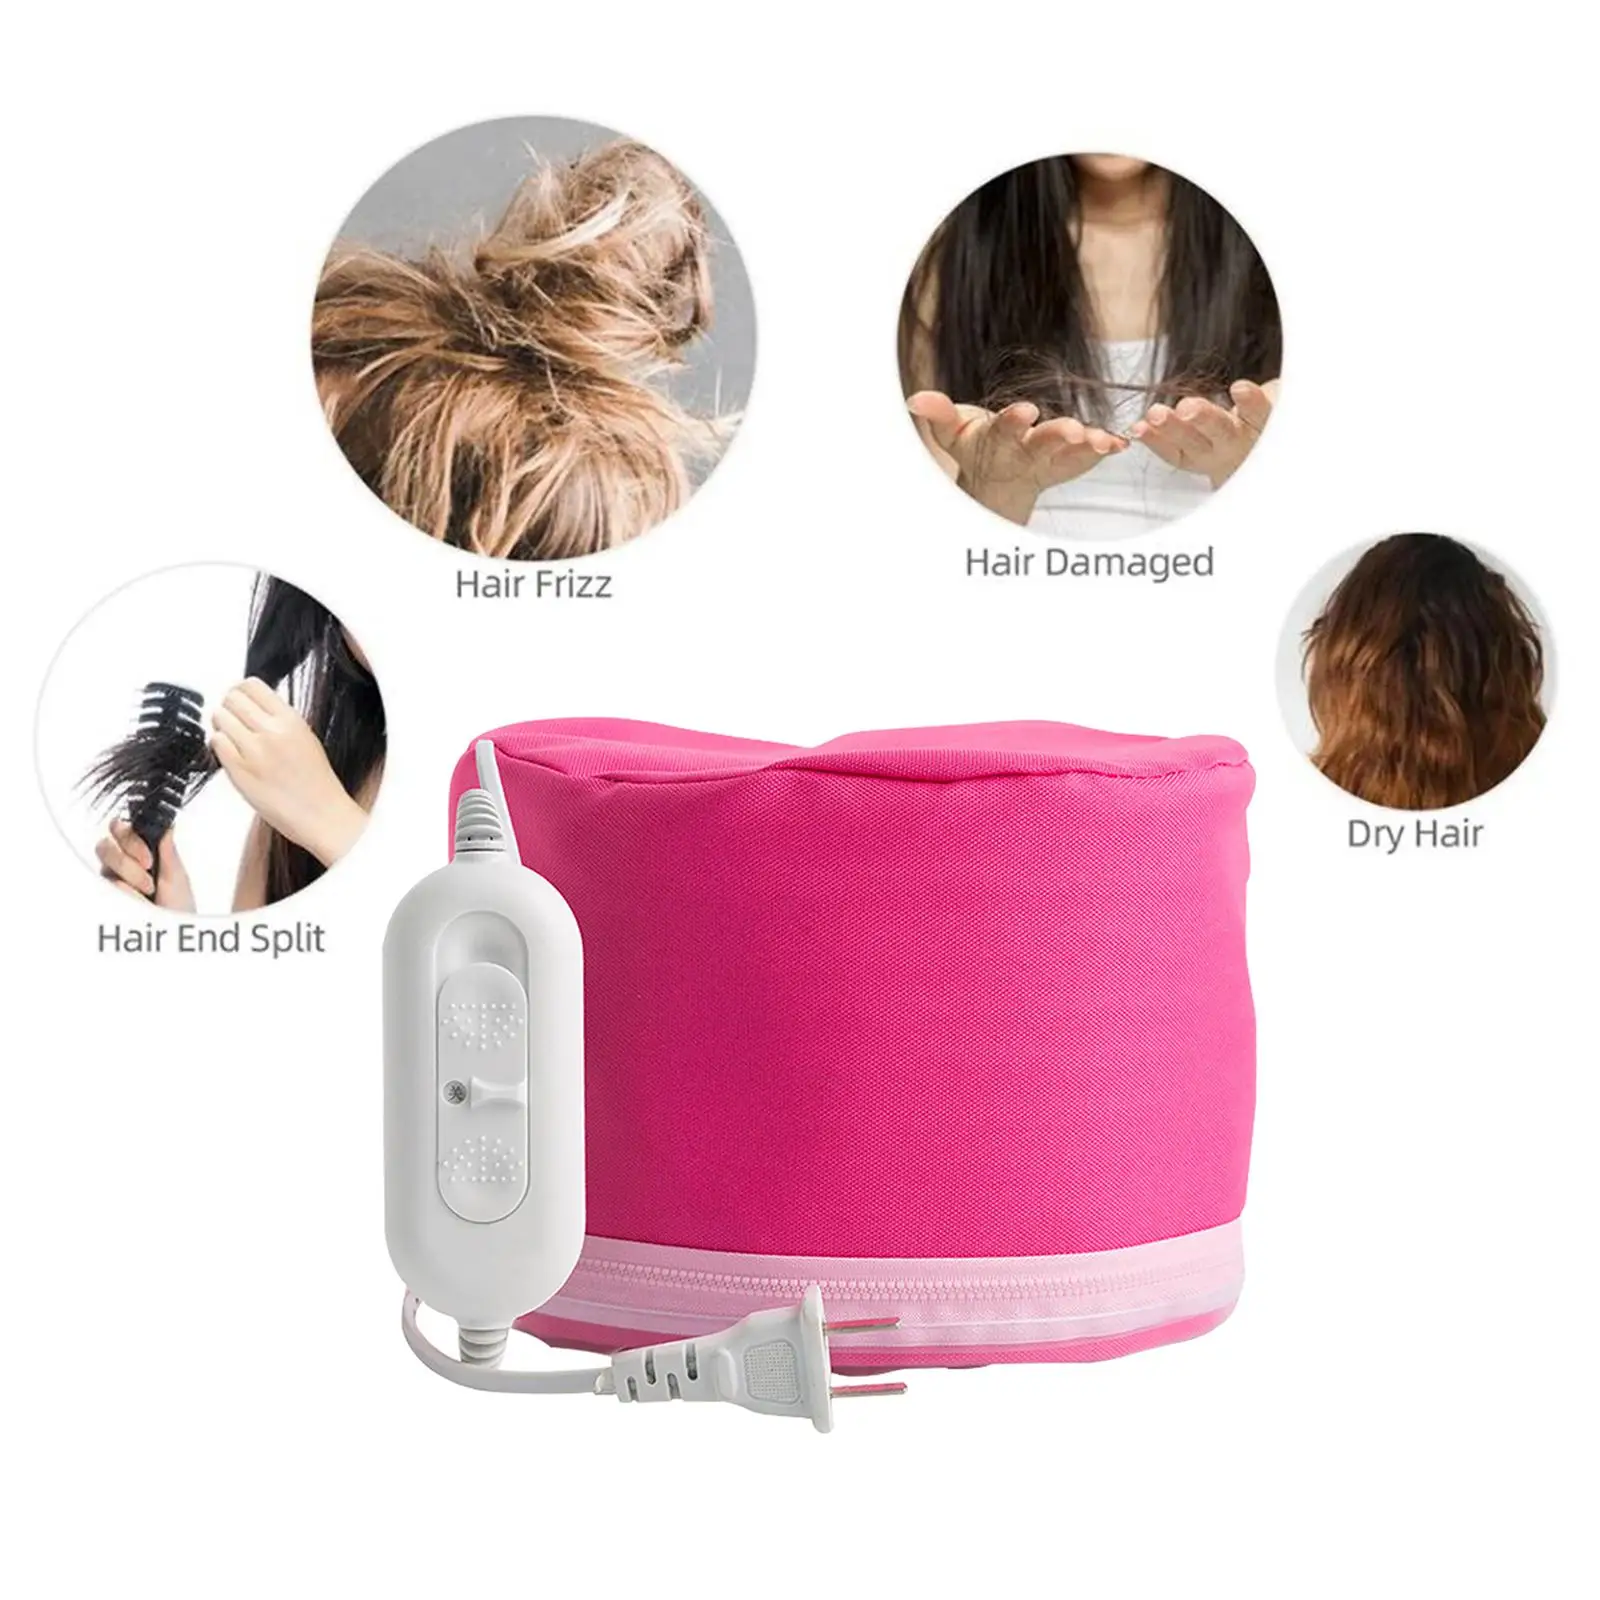 Hair Heating Caps Steamer 3-Mode Adjustable Size Essential Oil Caps Heating Hat for Deep Conditioning Salon Nourishing Hair SPA